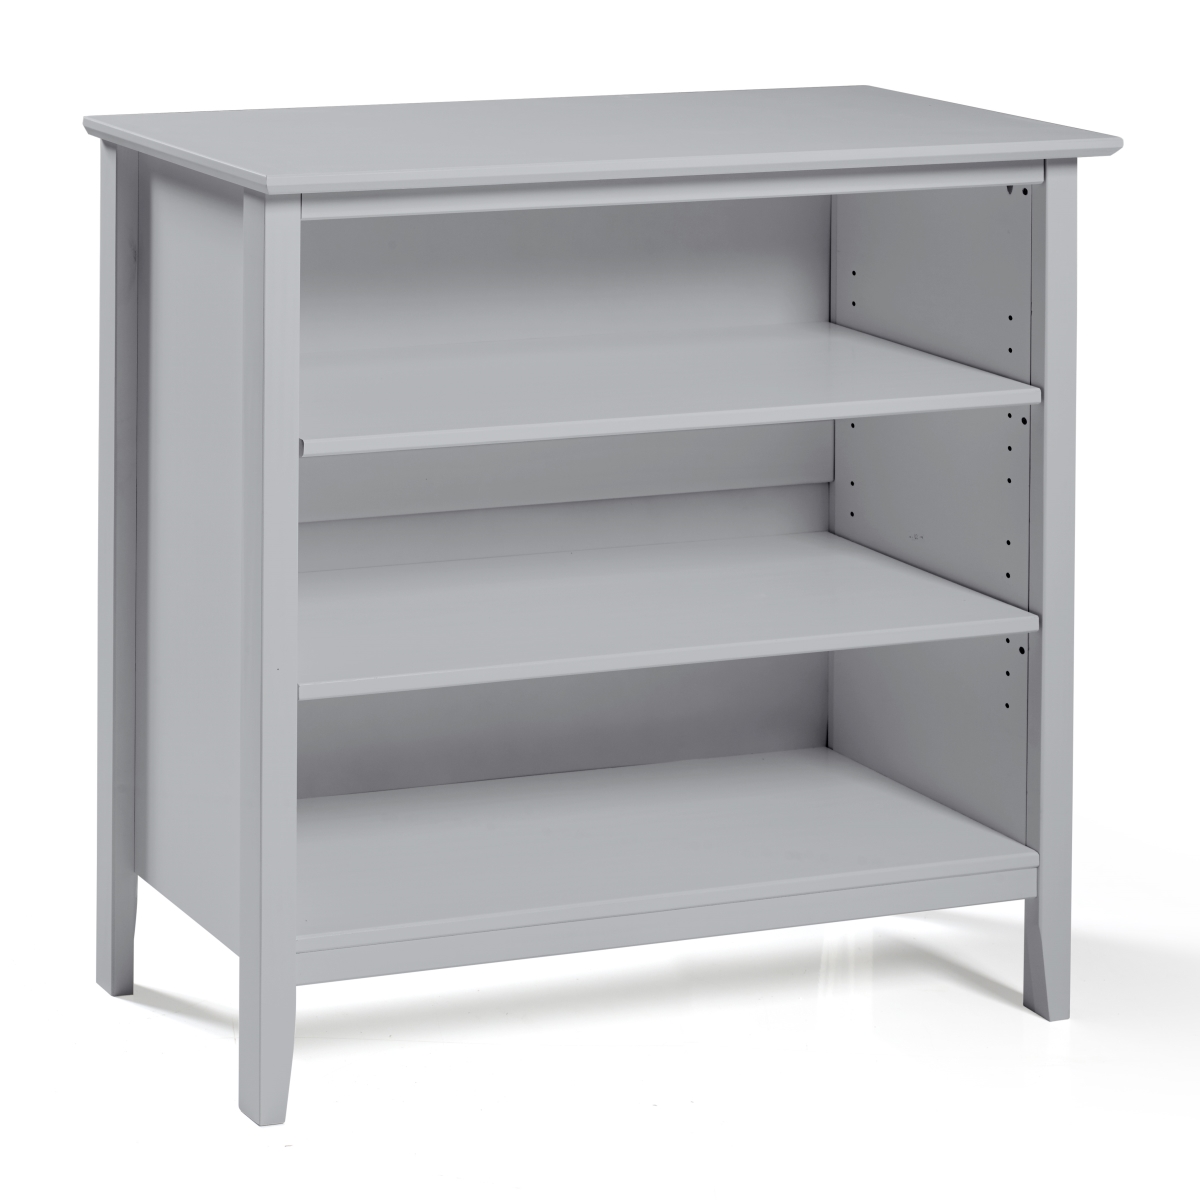 Picture of Alaterre AJSP0480 34 in. Simplicity Wood Under-Window 3-Shelf Bookcase, Dove Gray